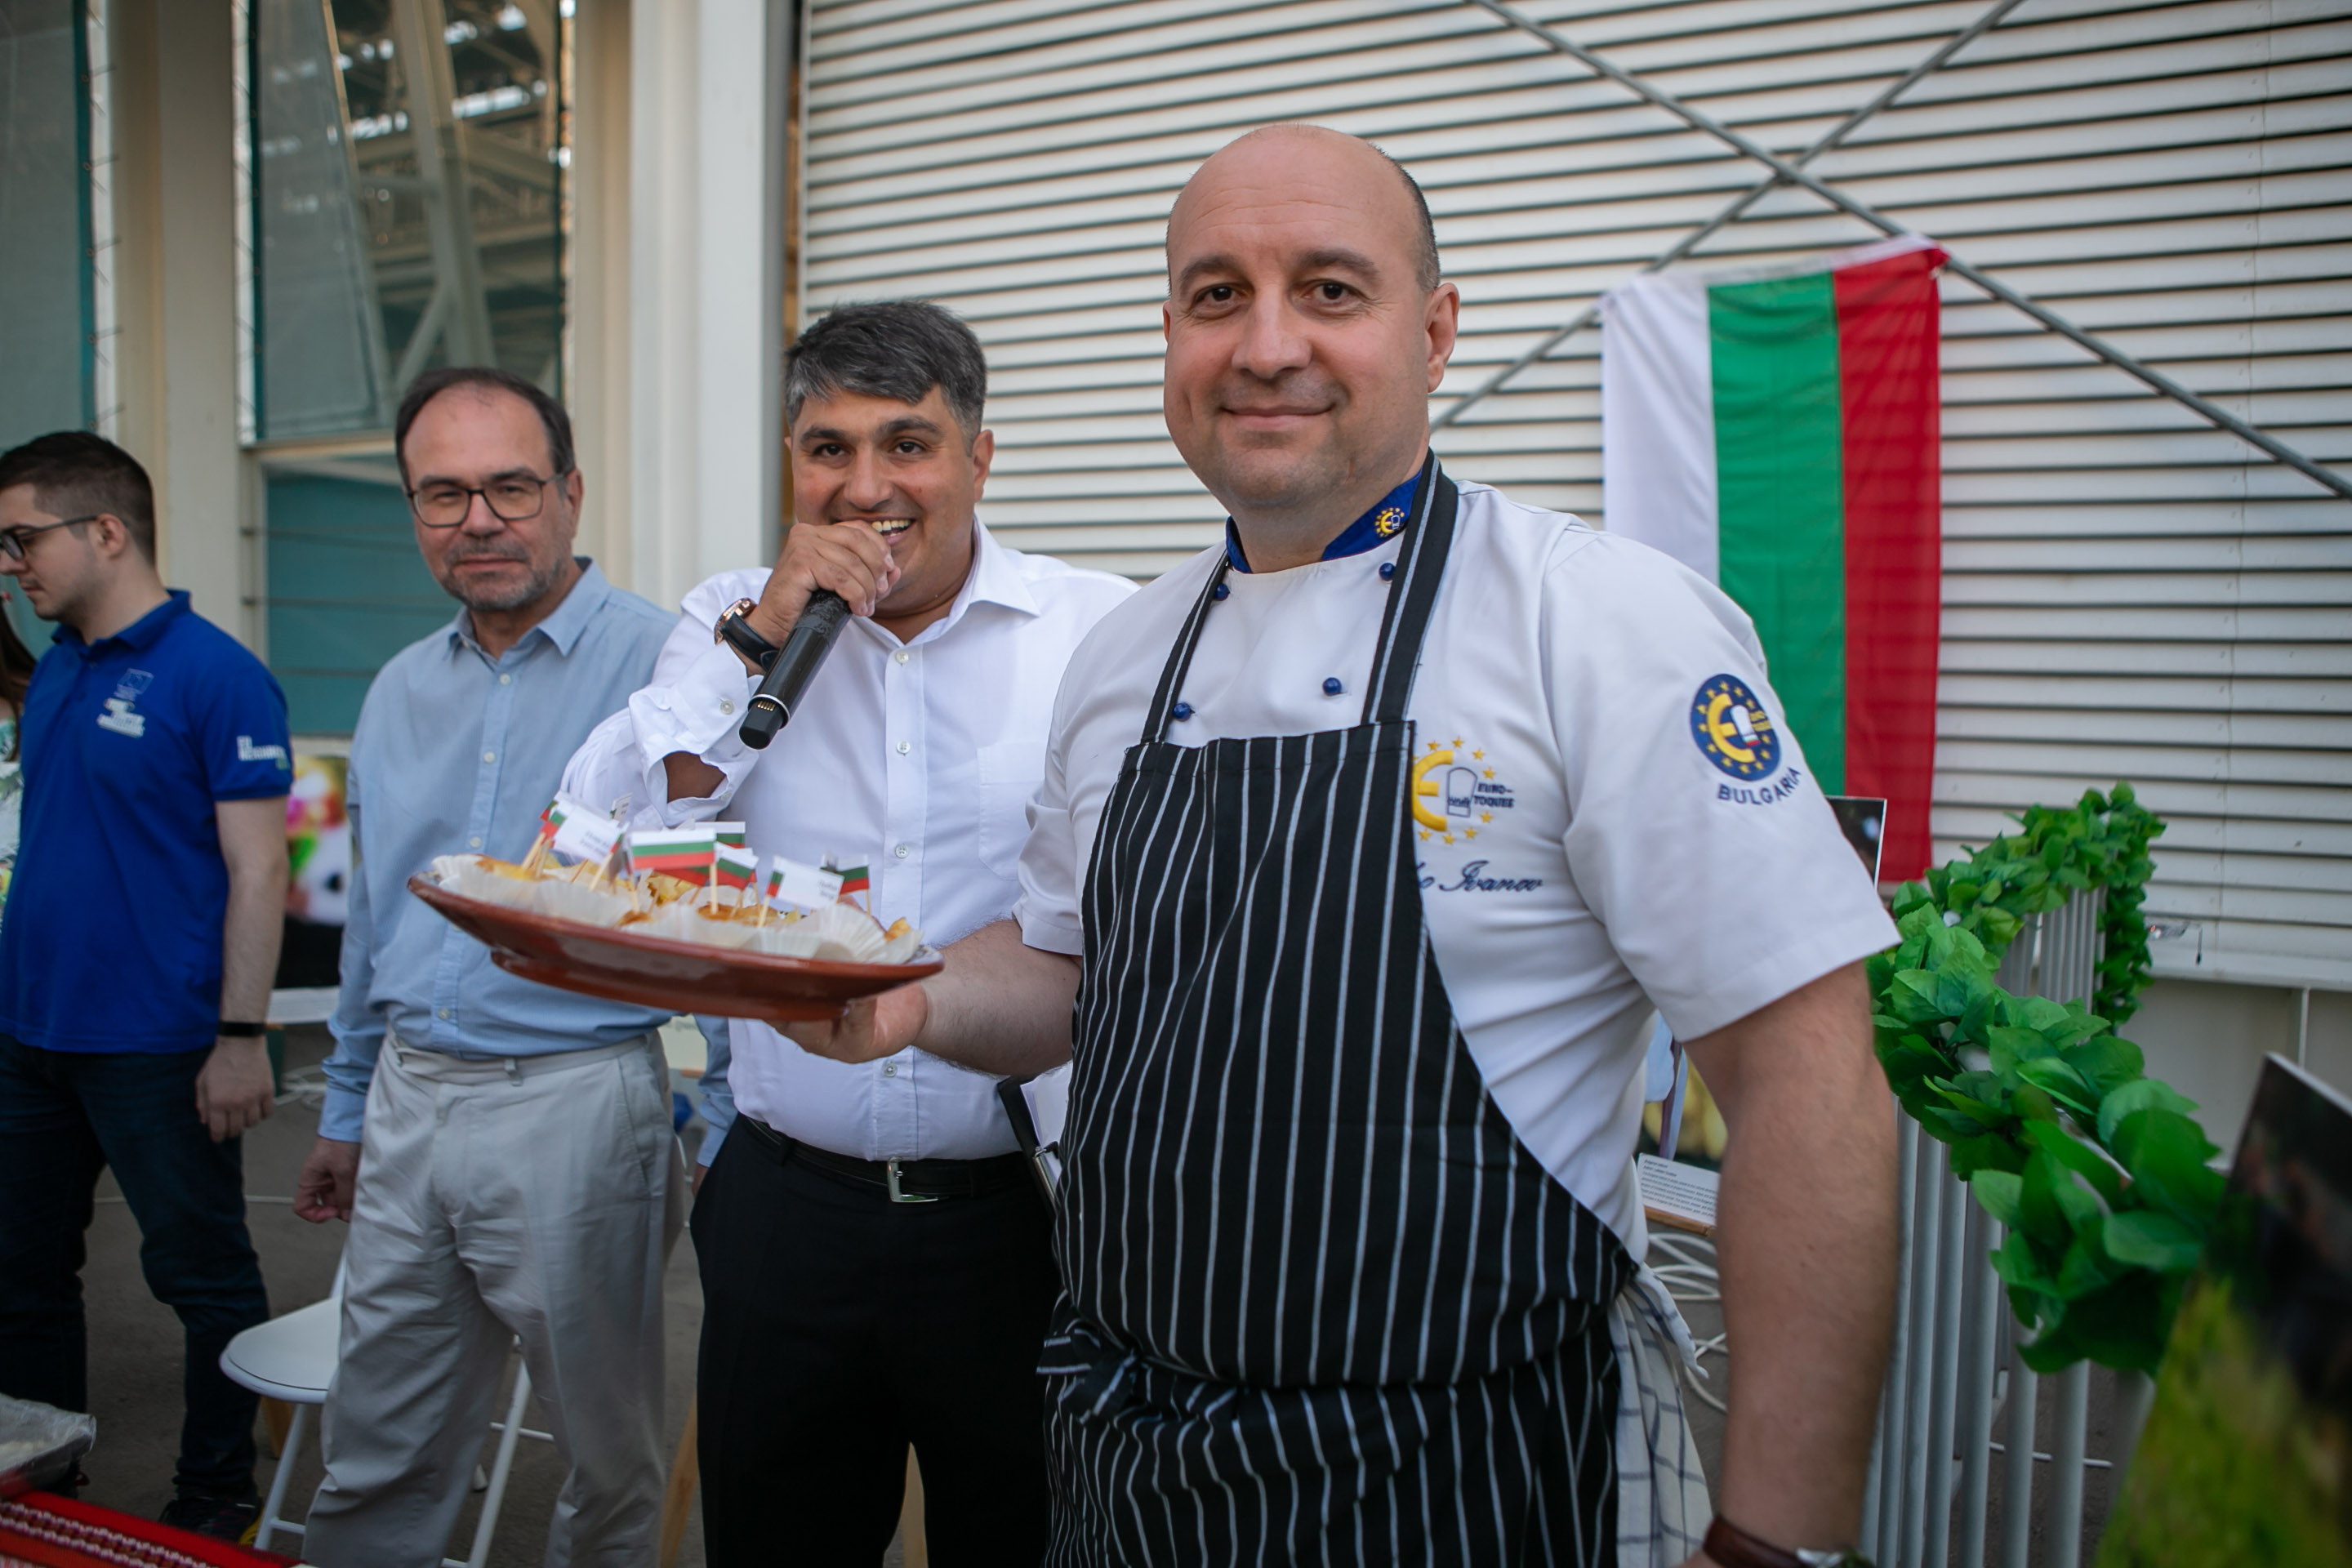 A culinary festival "Taste of Europe" was held for the first time in Baku